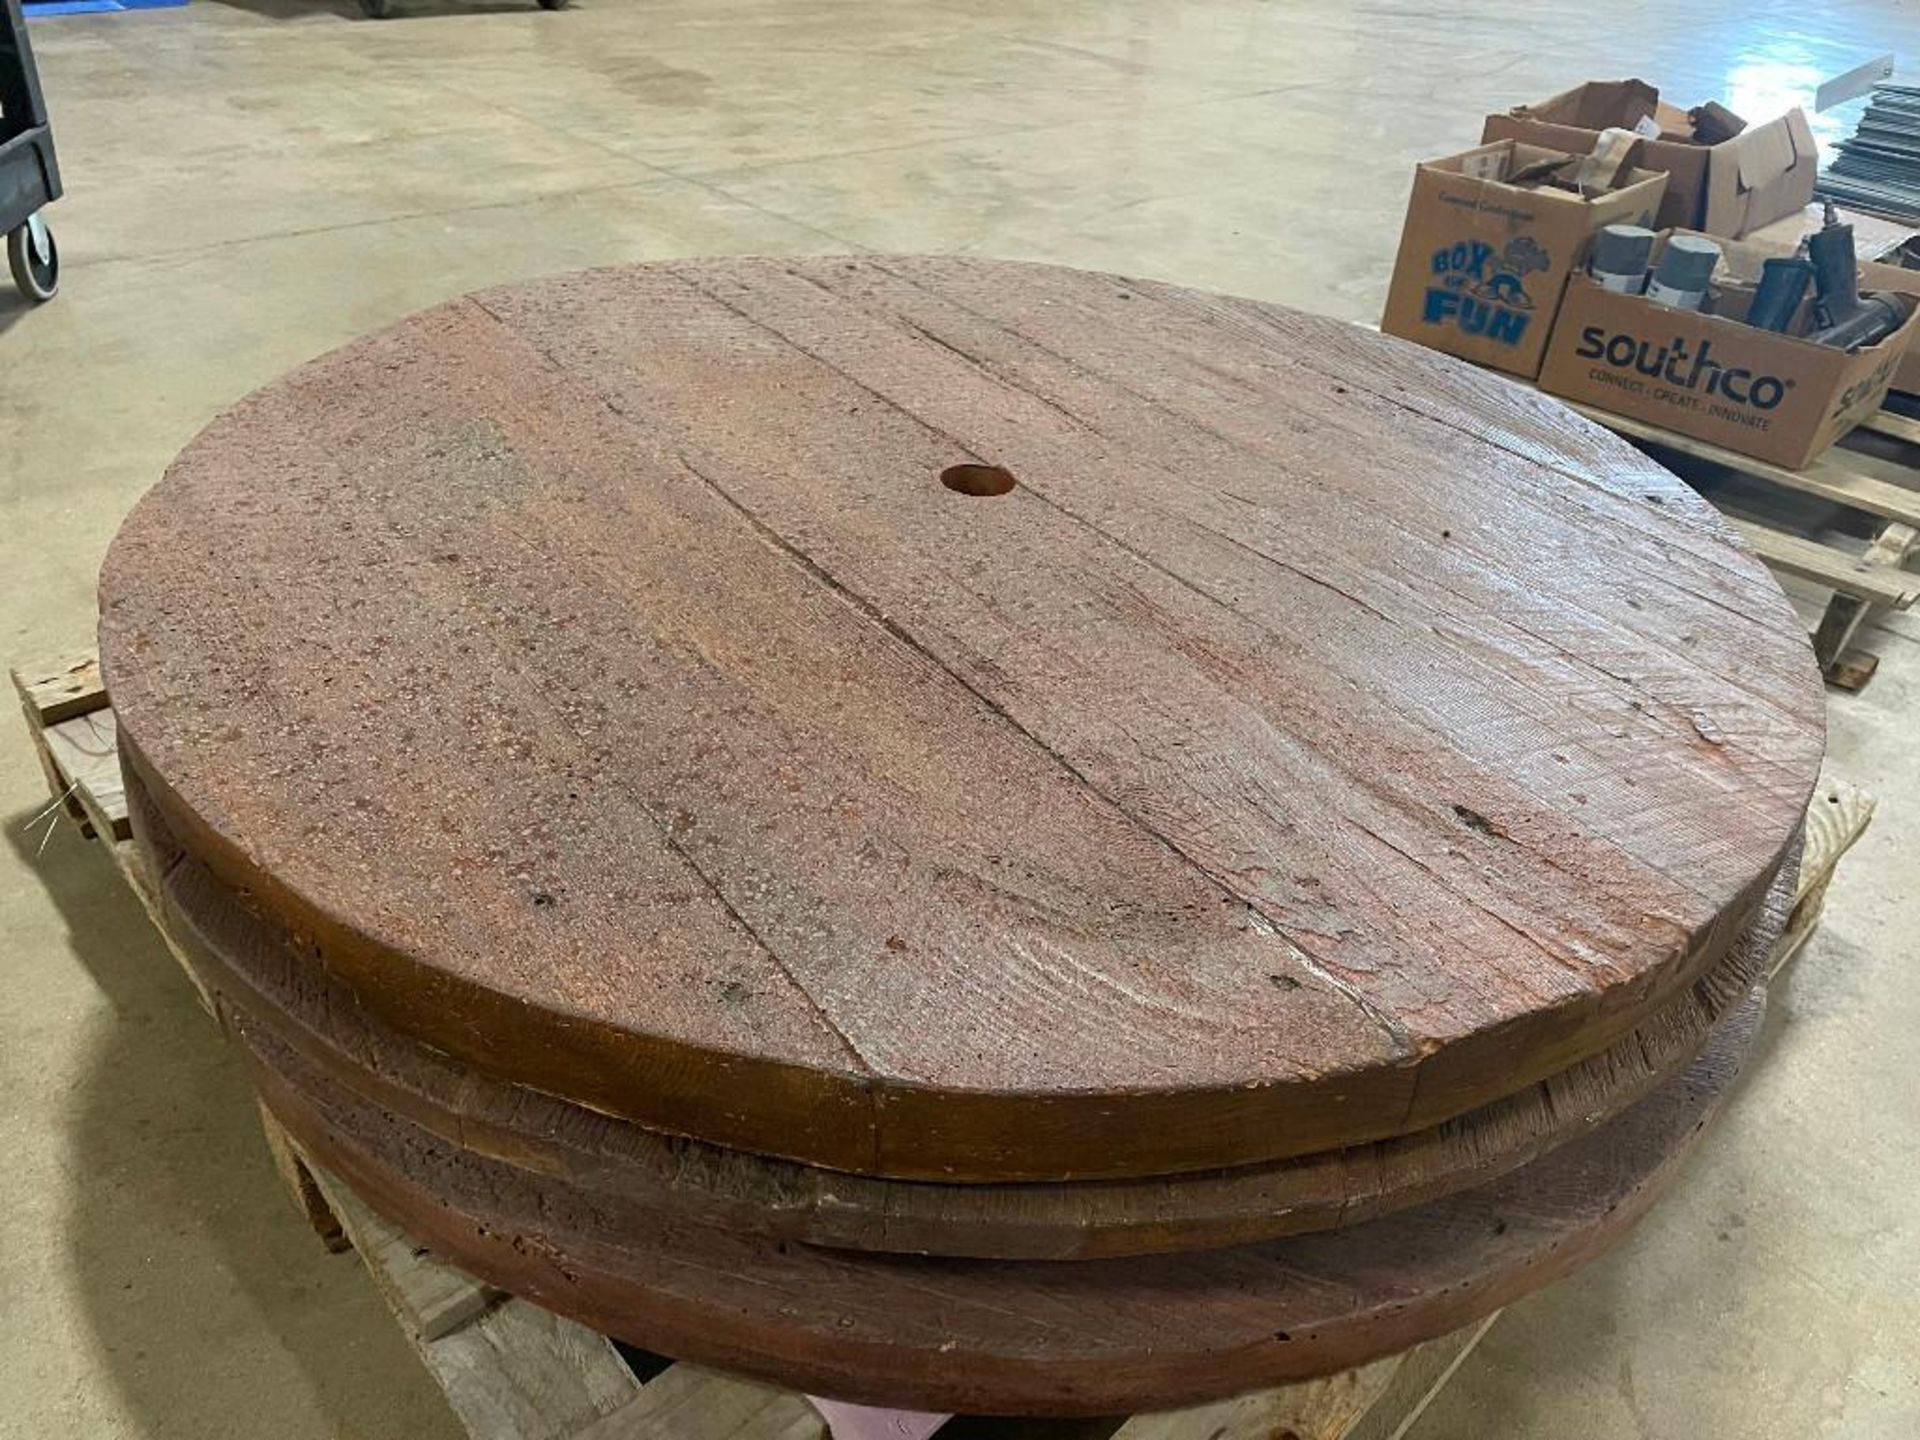 (3) 45" Round Concrete Table with Wood Design. Located in Hazelwood, MO. - Image 2 of 3